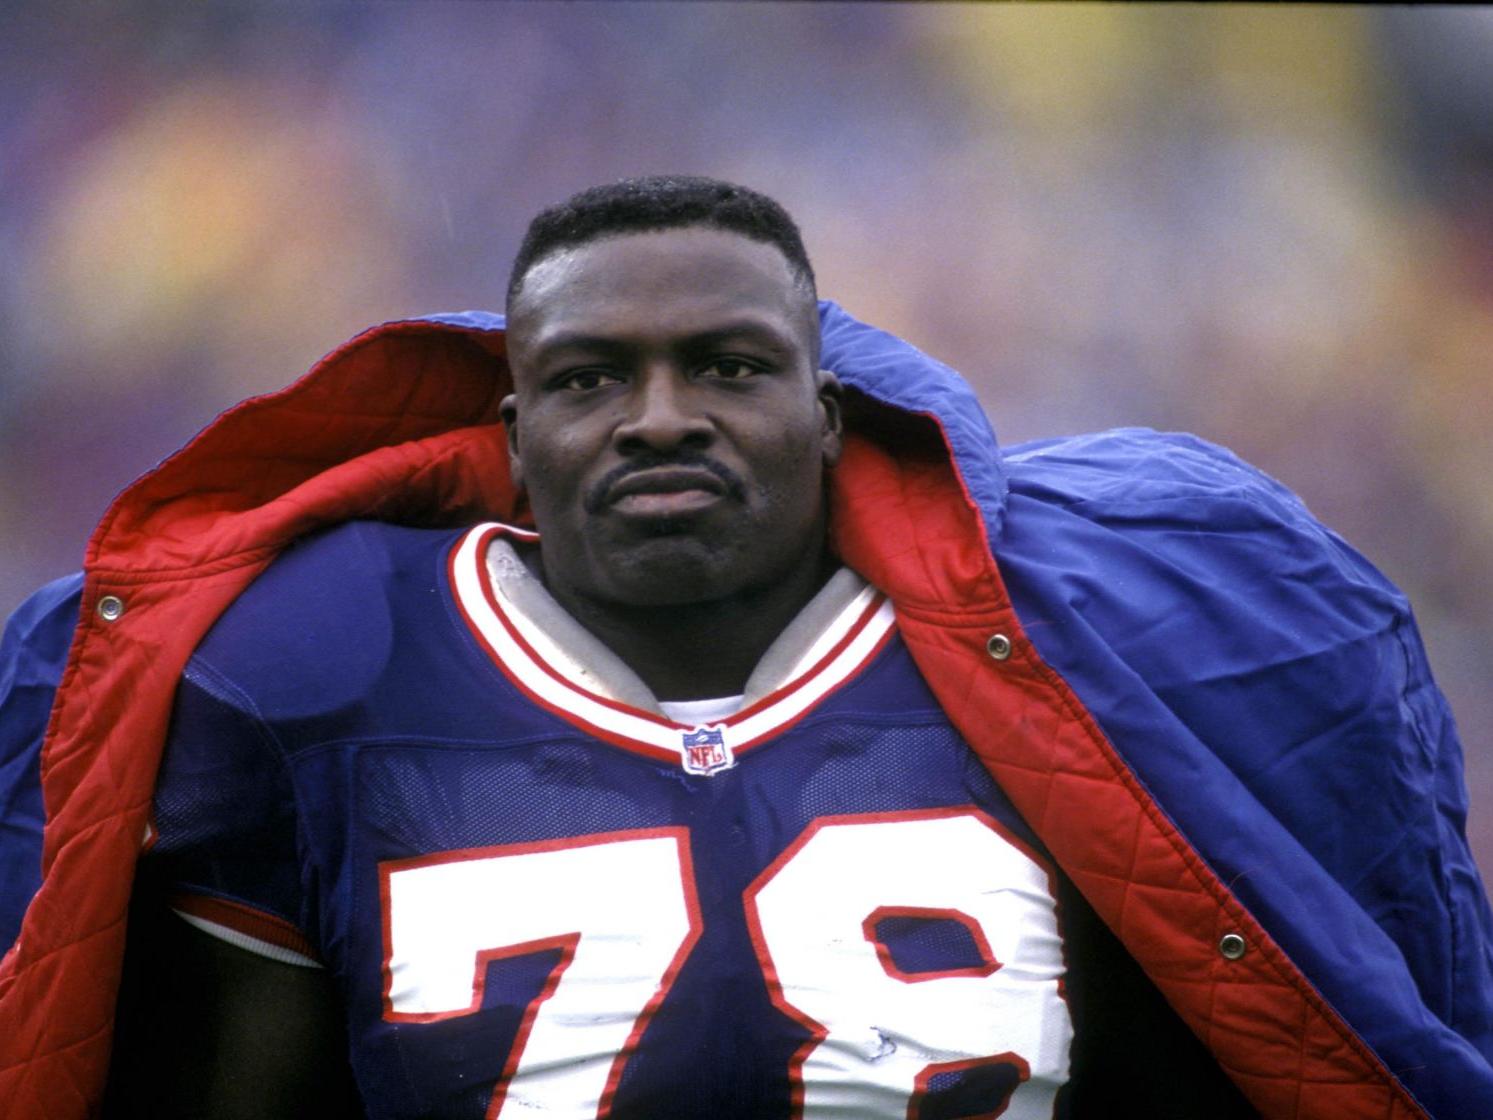 Documentary on Bruce Smith is poignant, includes details fans might not  know | Buffalo Bills News | NFL | buffalonews.com